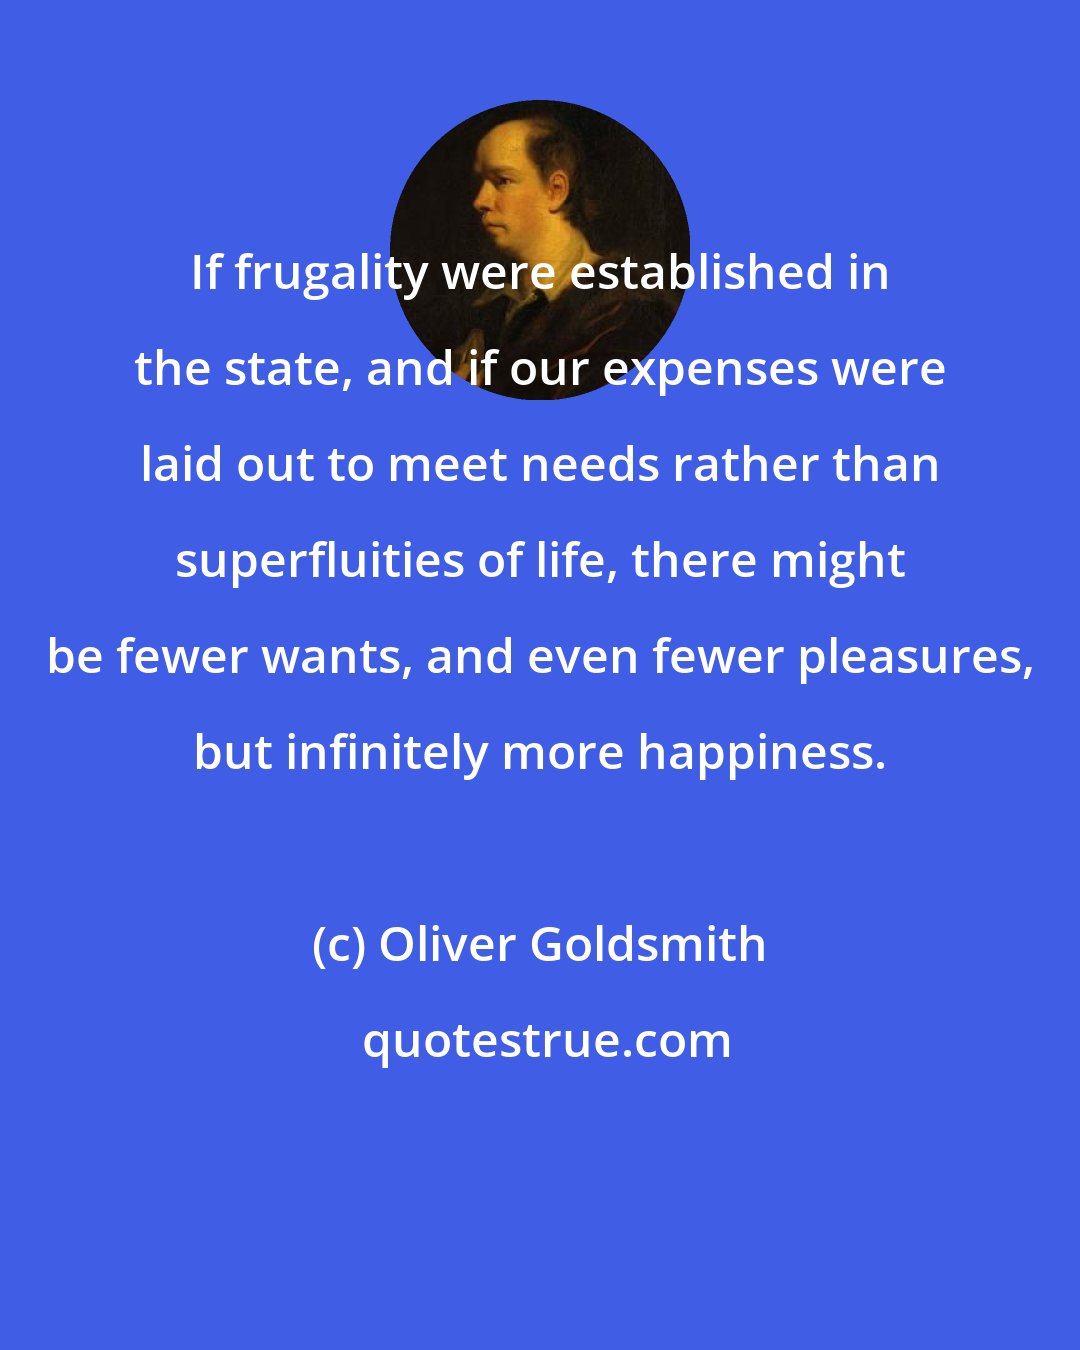 Oliver Goldsmith: If frugality were established in the state, and if our expenses were laid out to meet needs rather than superfluities of life, there might be fewer wants, and even fewer pleasures, but infinitely more happiness.